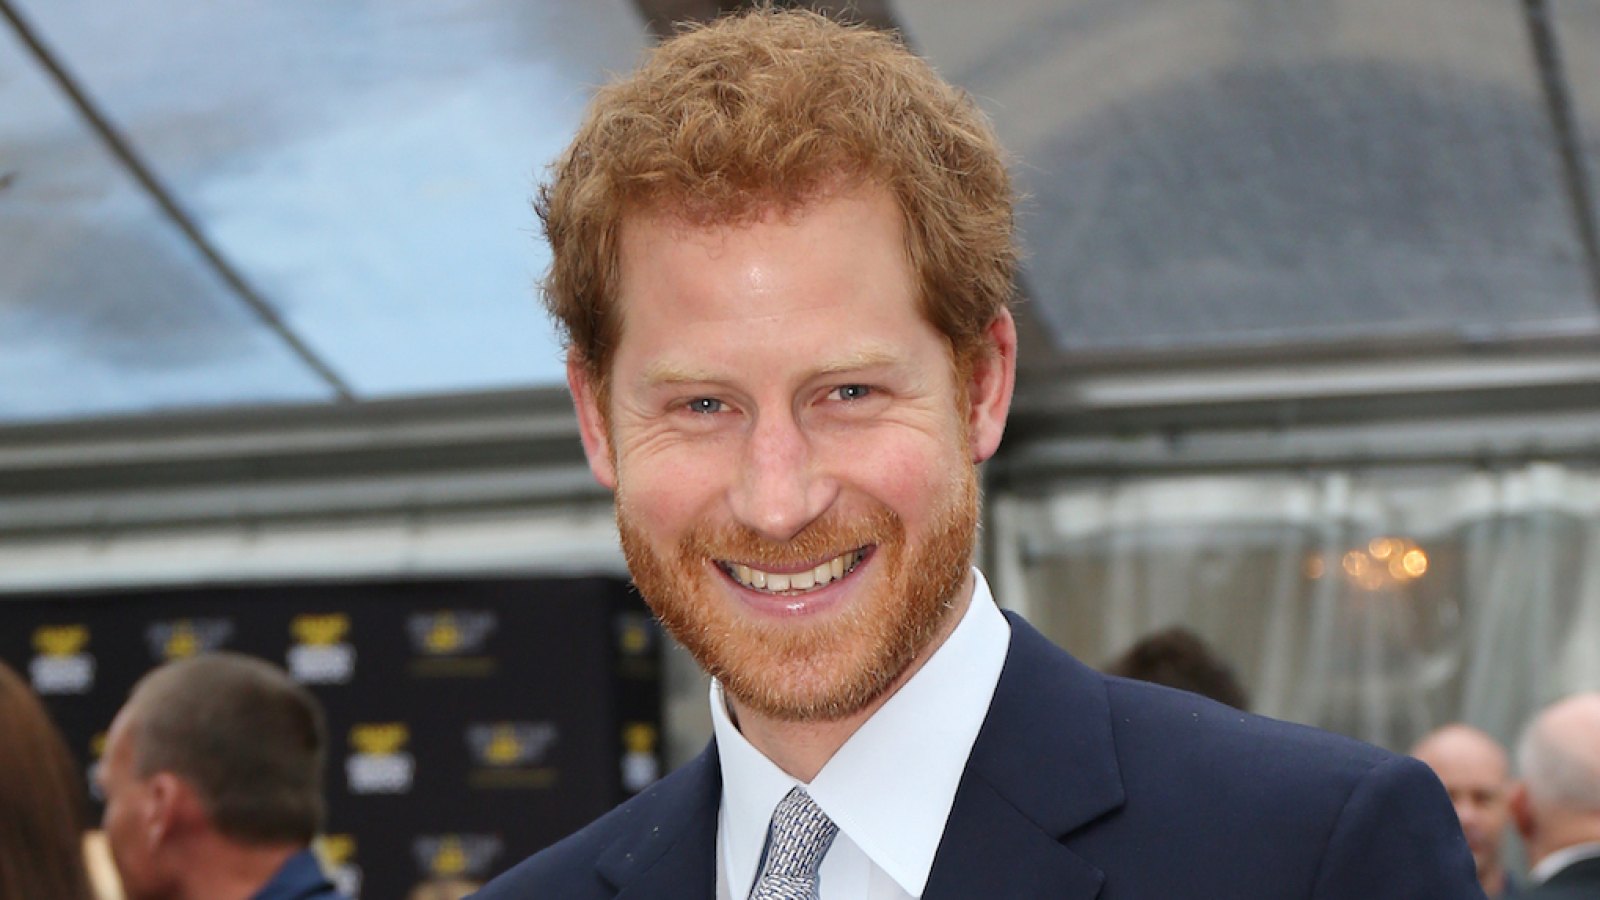 Prince Harry Reveals He ‘Wanted Out’ of the Royal Family